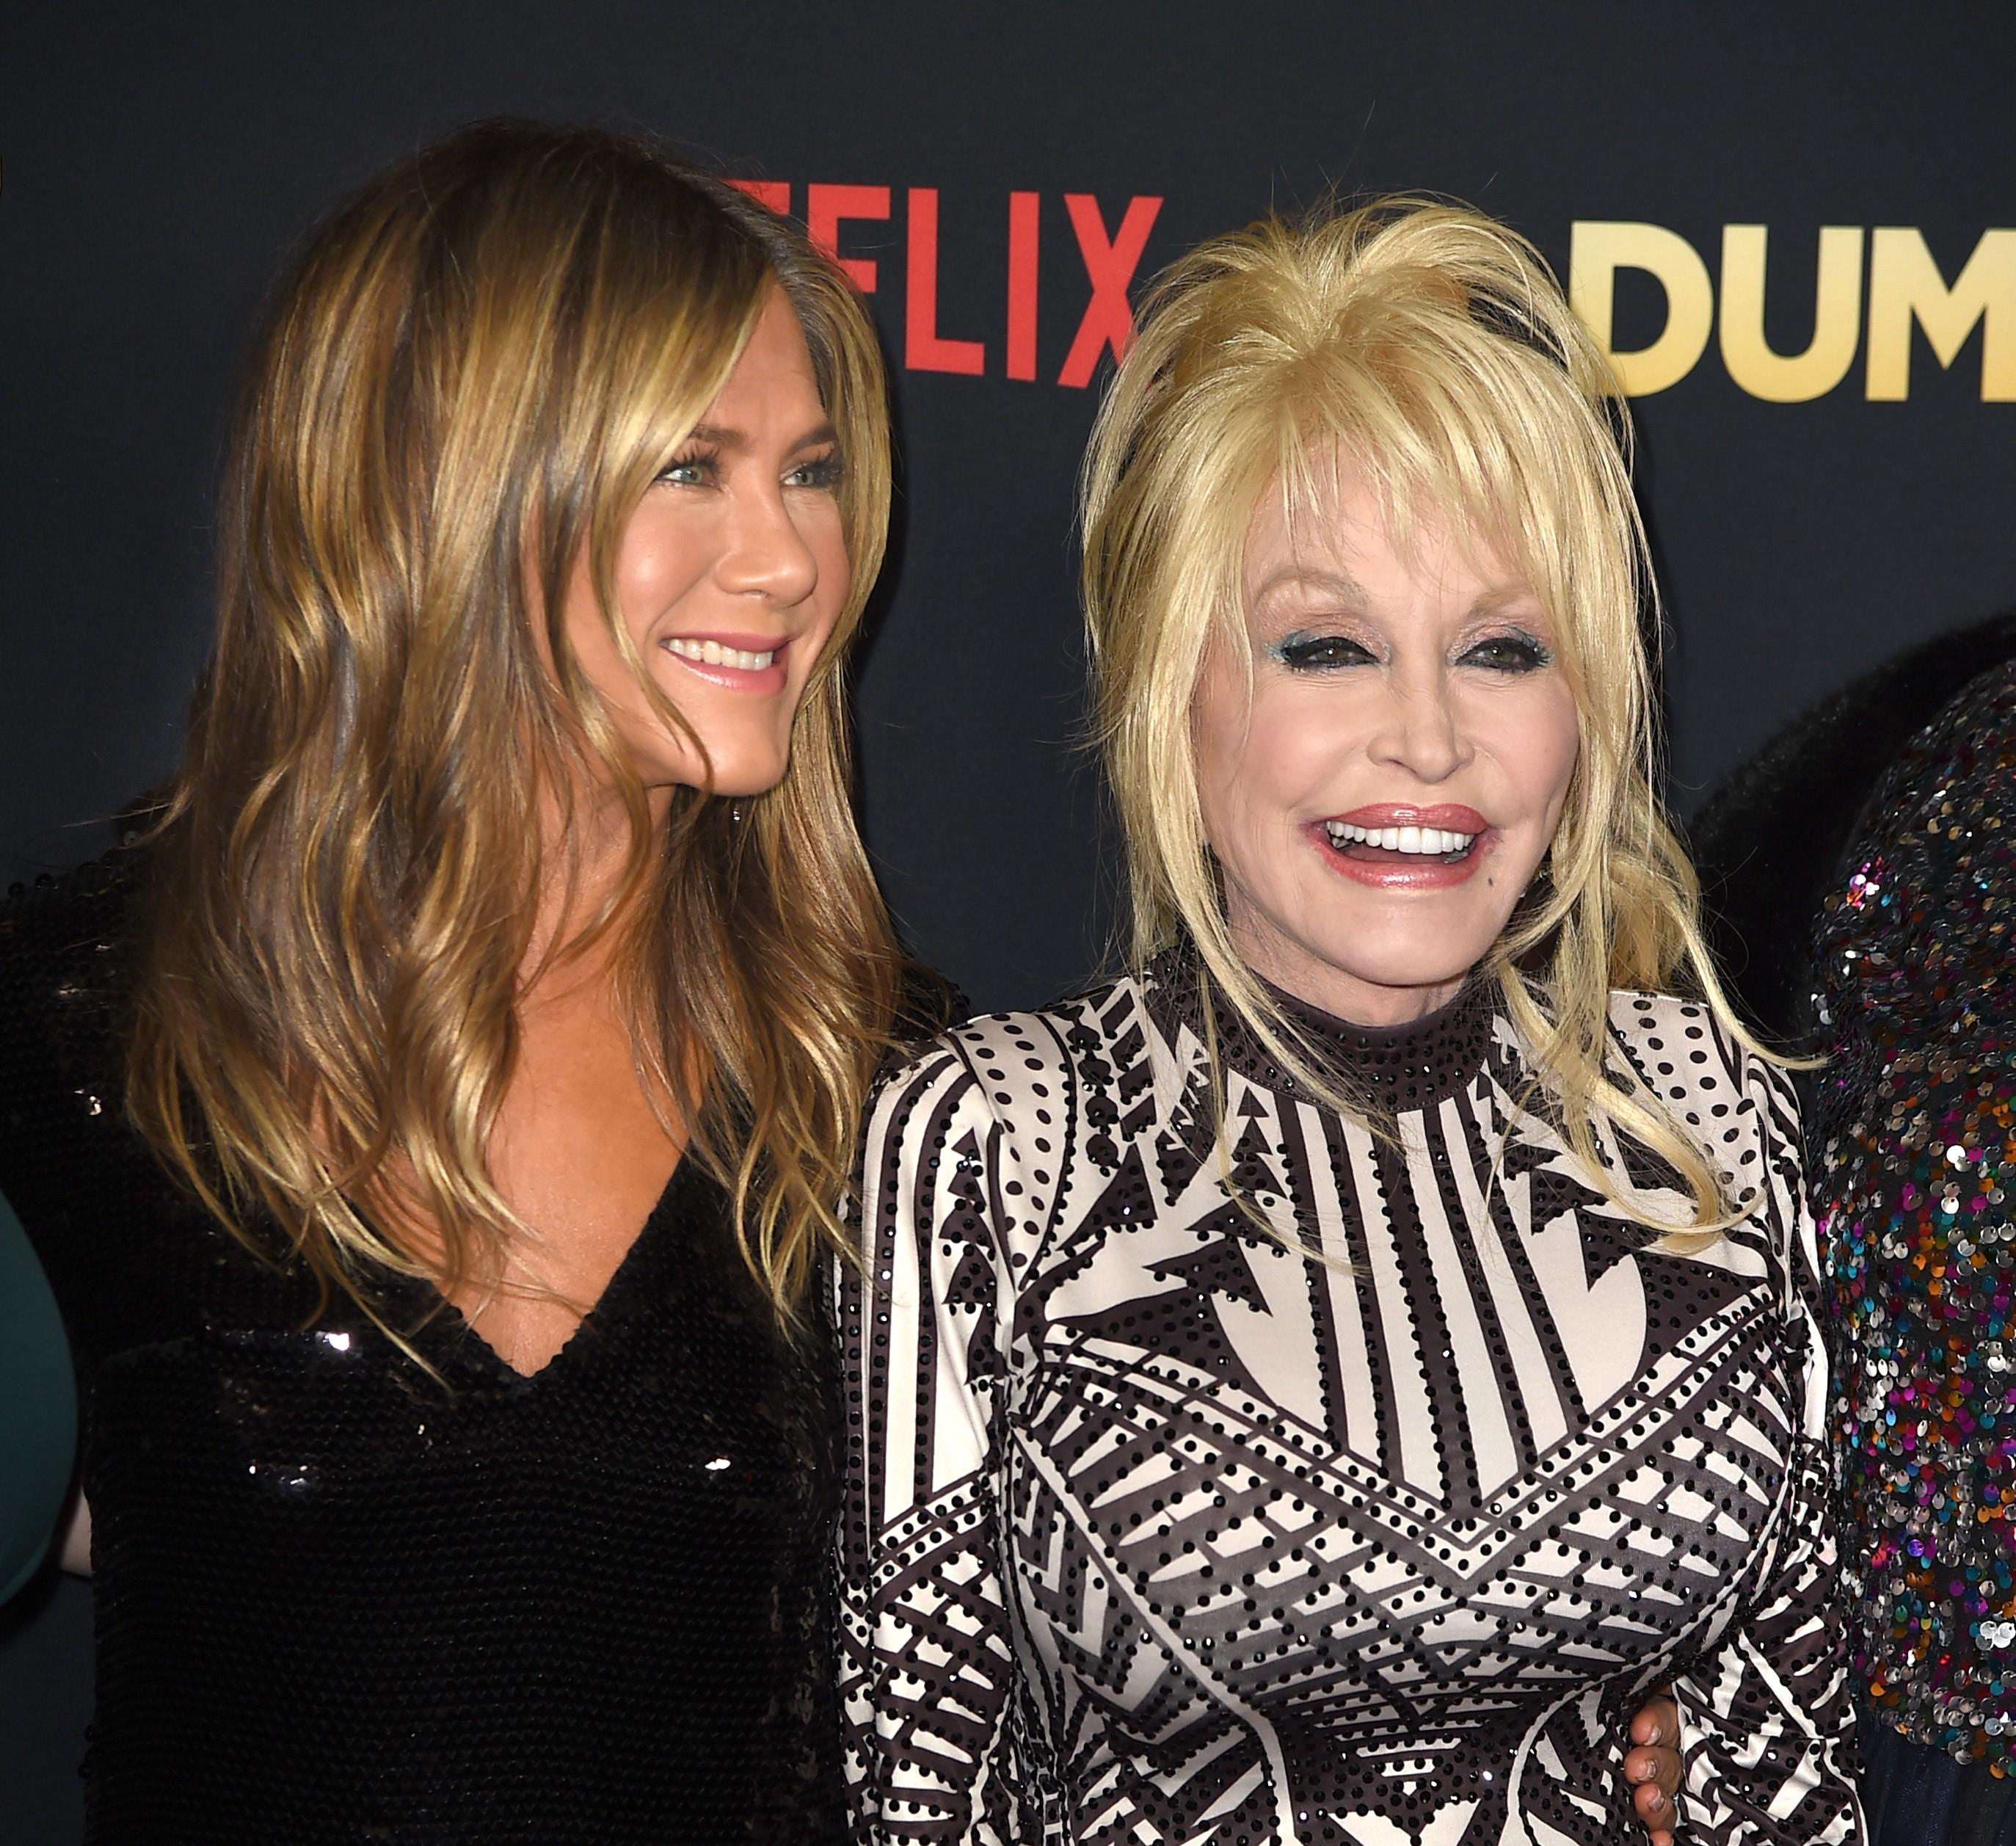 Friends actor Jennifer Aniston wears a black dress, and Dolly Parton wears a black-and-white dress.